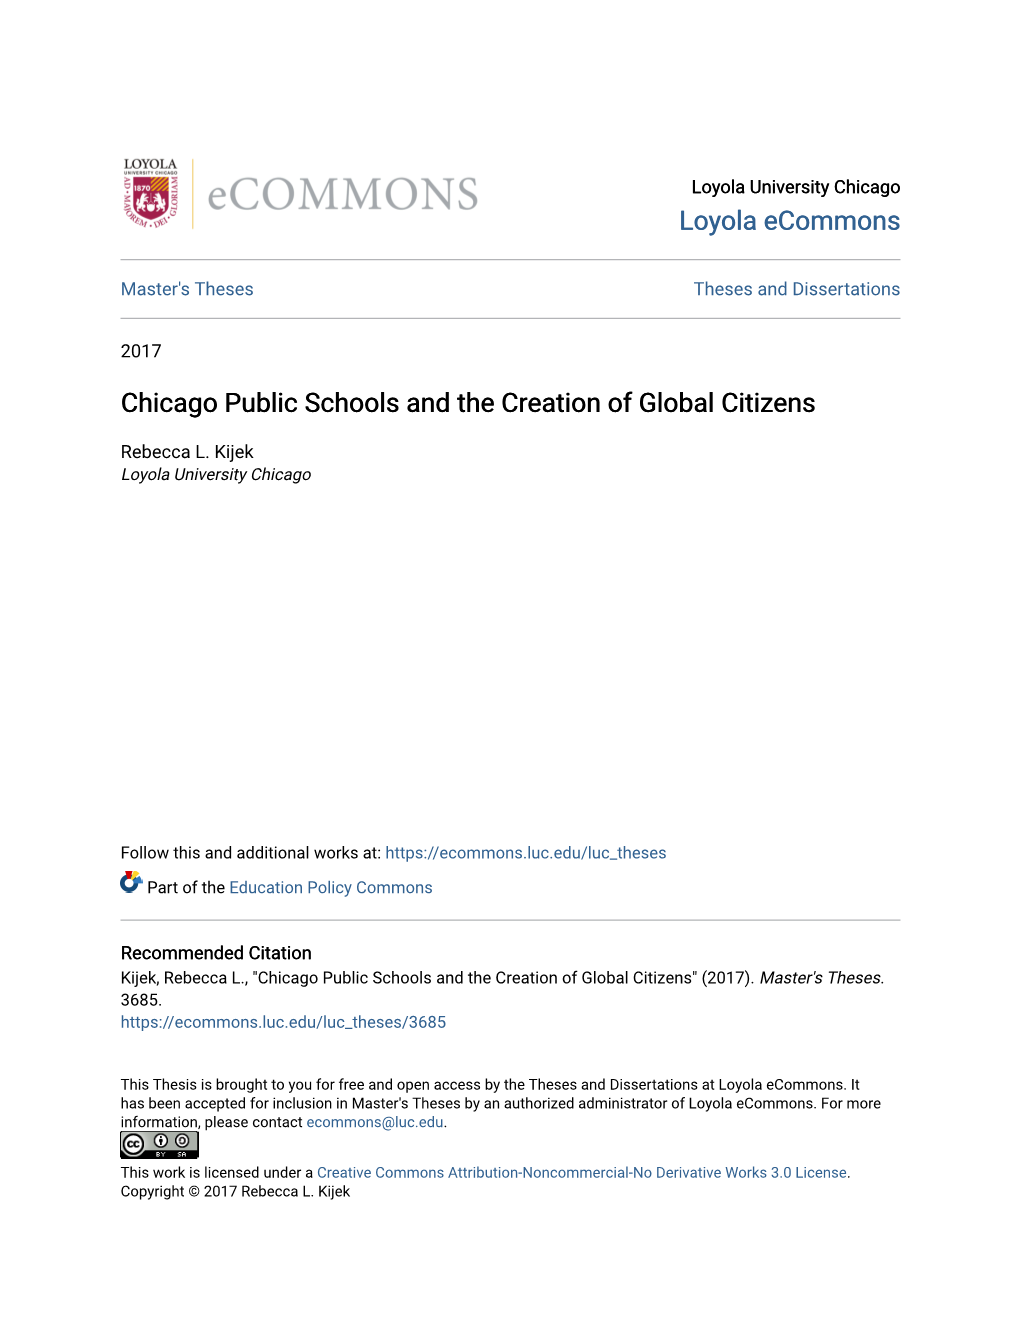 Chicago Public Schools and the Creation of Global Citizens